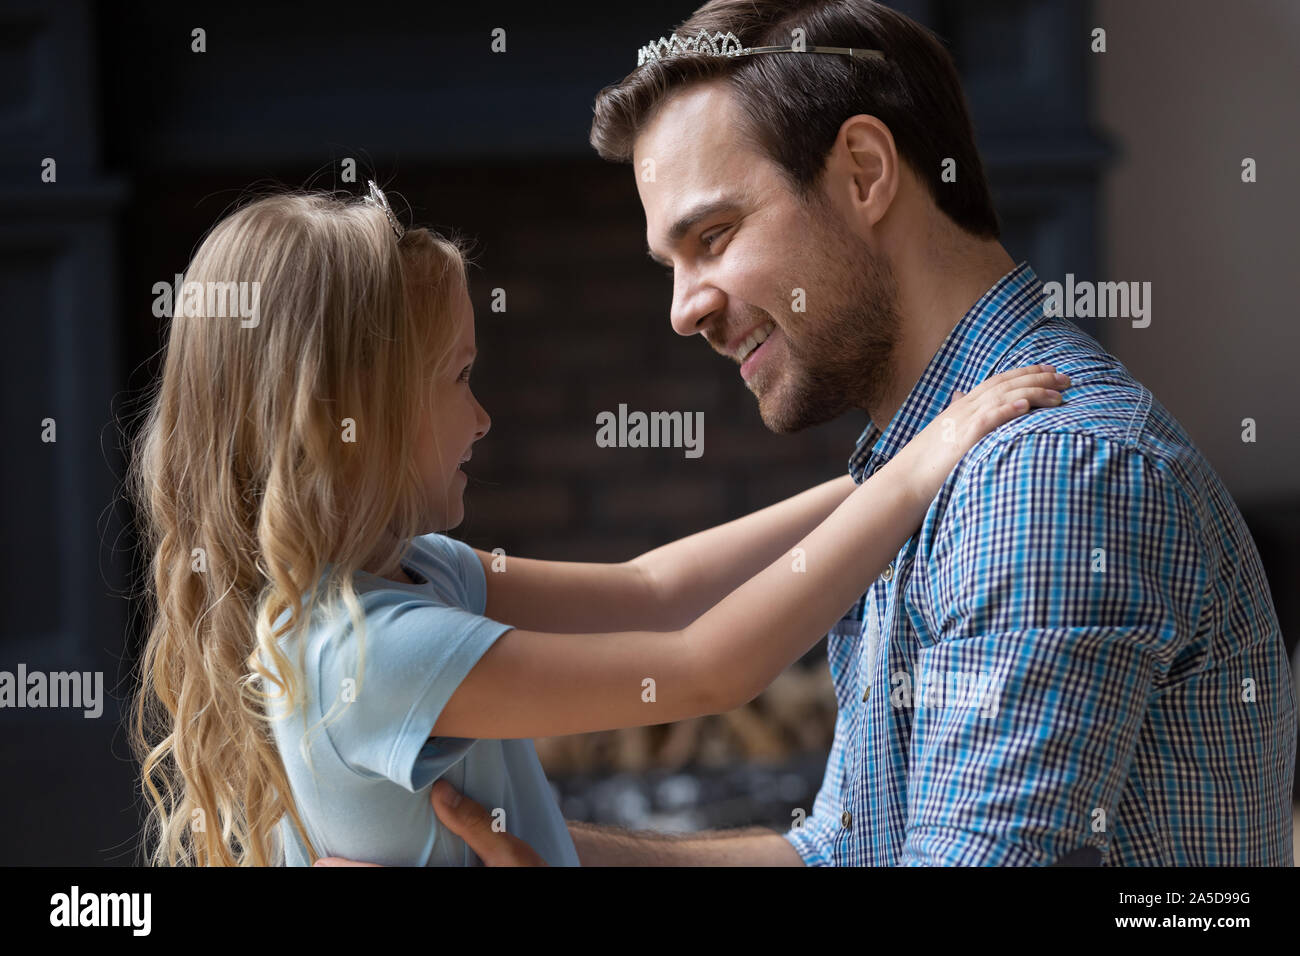 Smiling father and daughter wearing crowns hugging at home Stock Photo